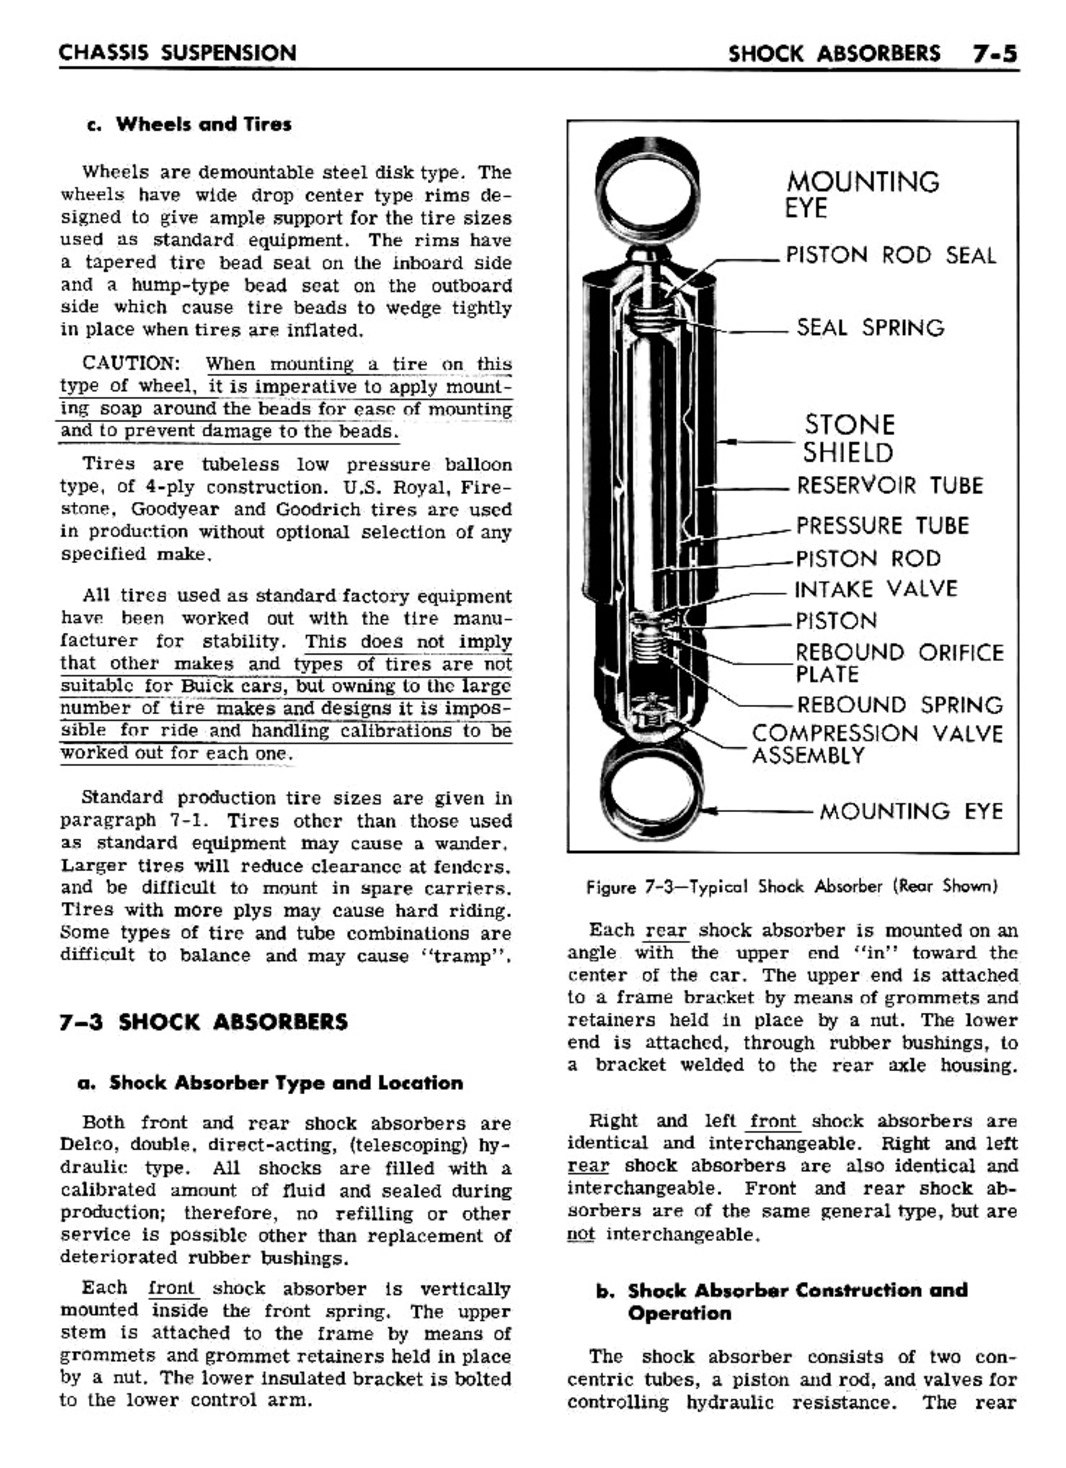 n_07 1961 Buick Shop Manual - Chassis Suspension-005-005.jpg